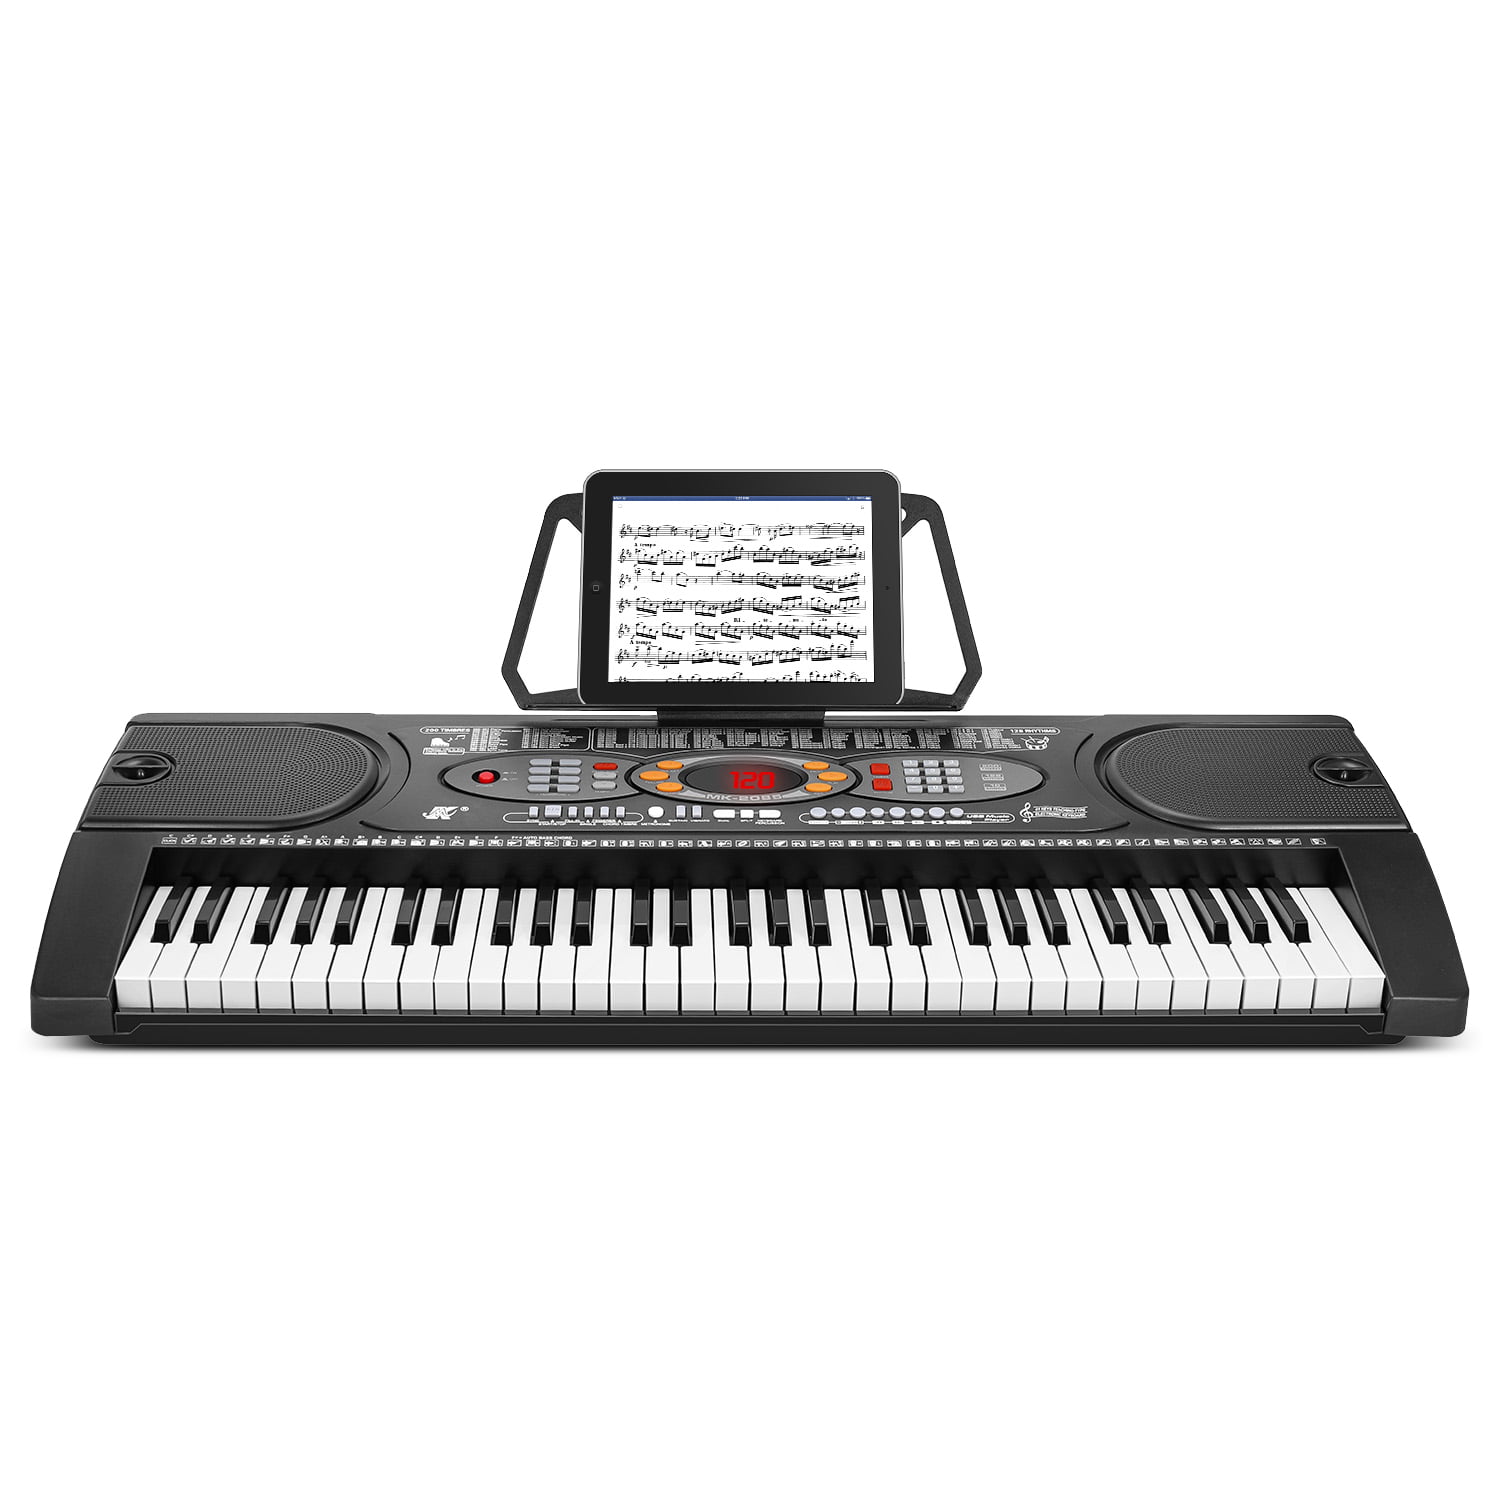 Childrens Recording Electronic 36Key Keyboard Piano With Stand Microphone Stool 